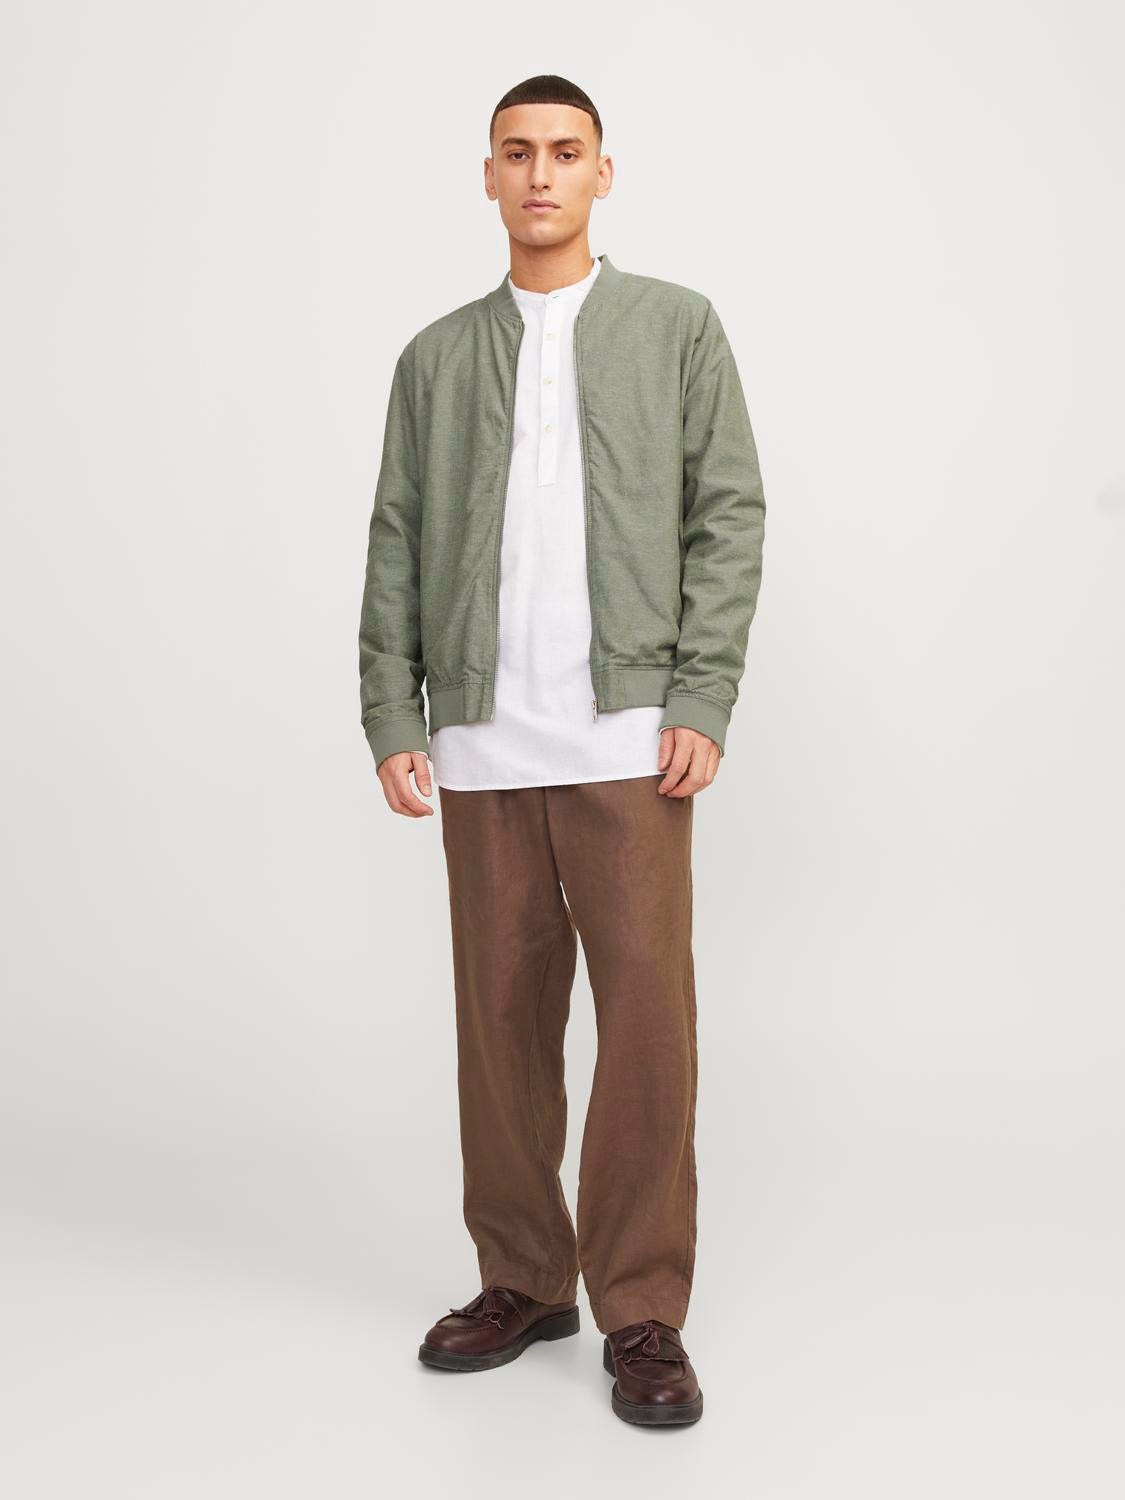 Jack and Jones short bomber jacket with faux fur hood in dusty green -  ShopStyle